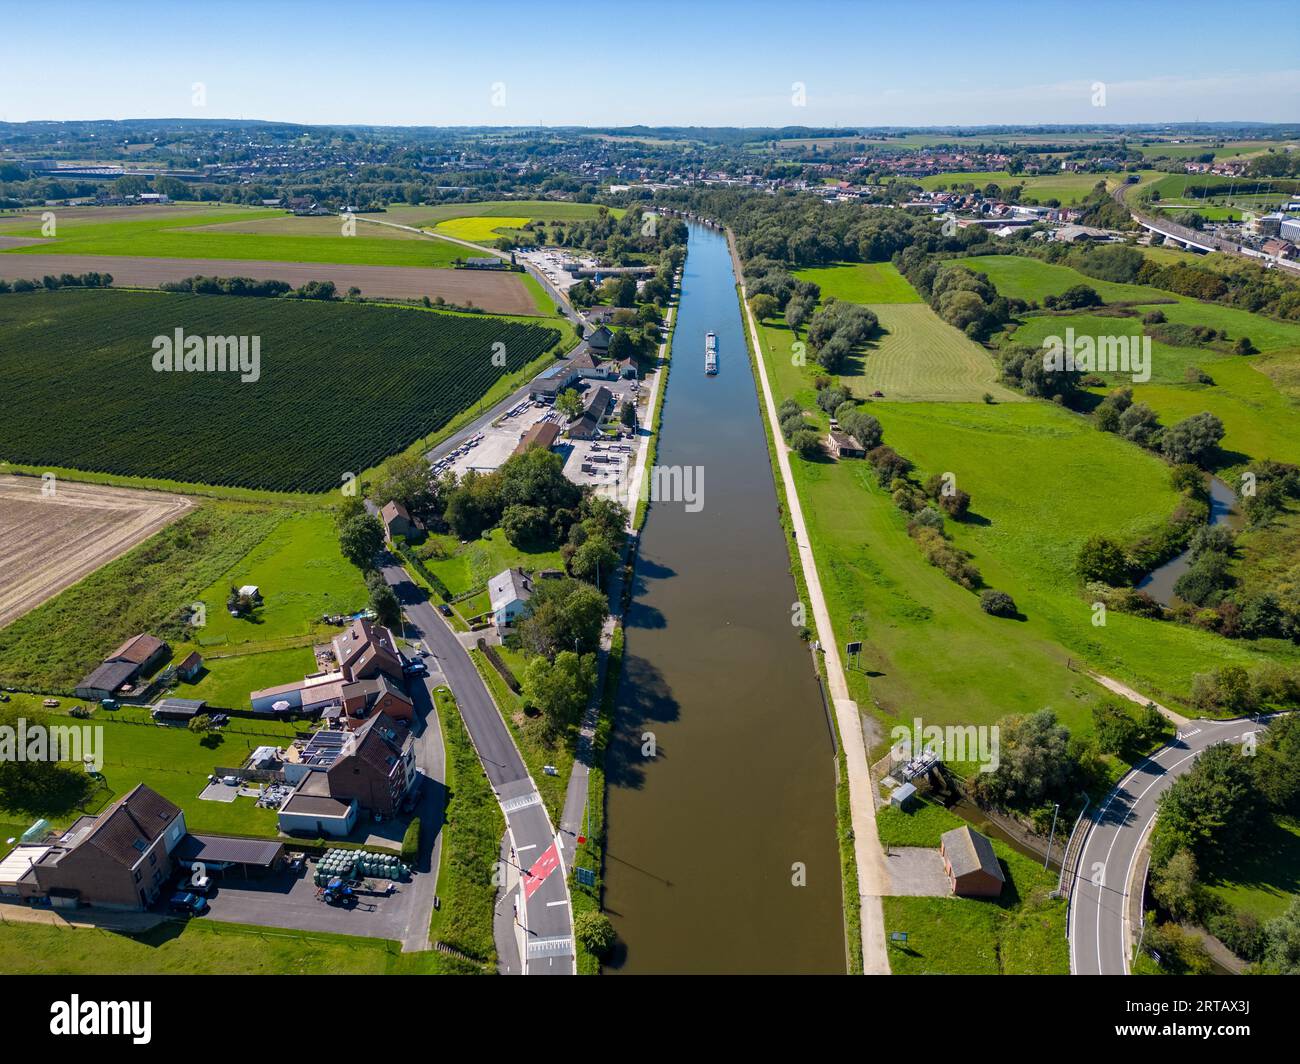 Lembeek, Halle, Vlaams Brabant, Belgium,Sep 5th 2023, cargo ship or barge passing on the Canal Brussels Charleroi, which is a man made waterway in Belgium. It's still in active use in transporting goods and raw material. High quality photo Stock Photo